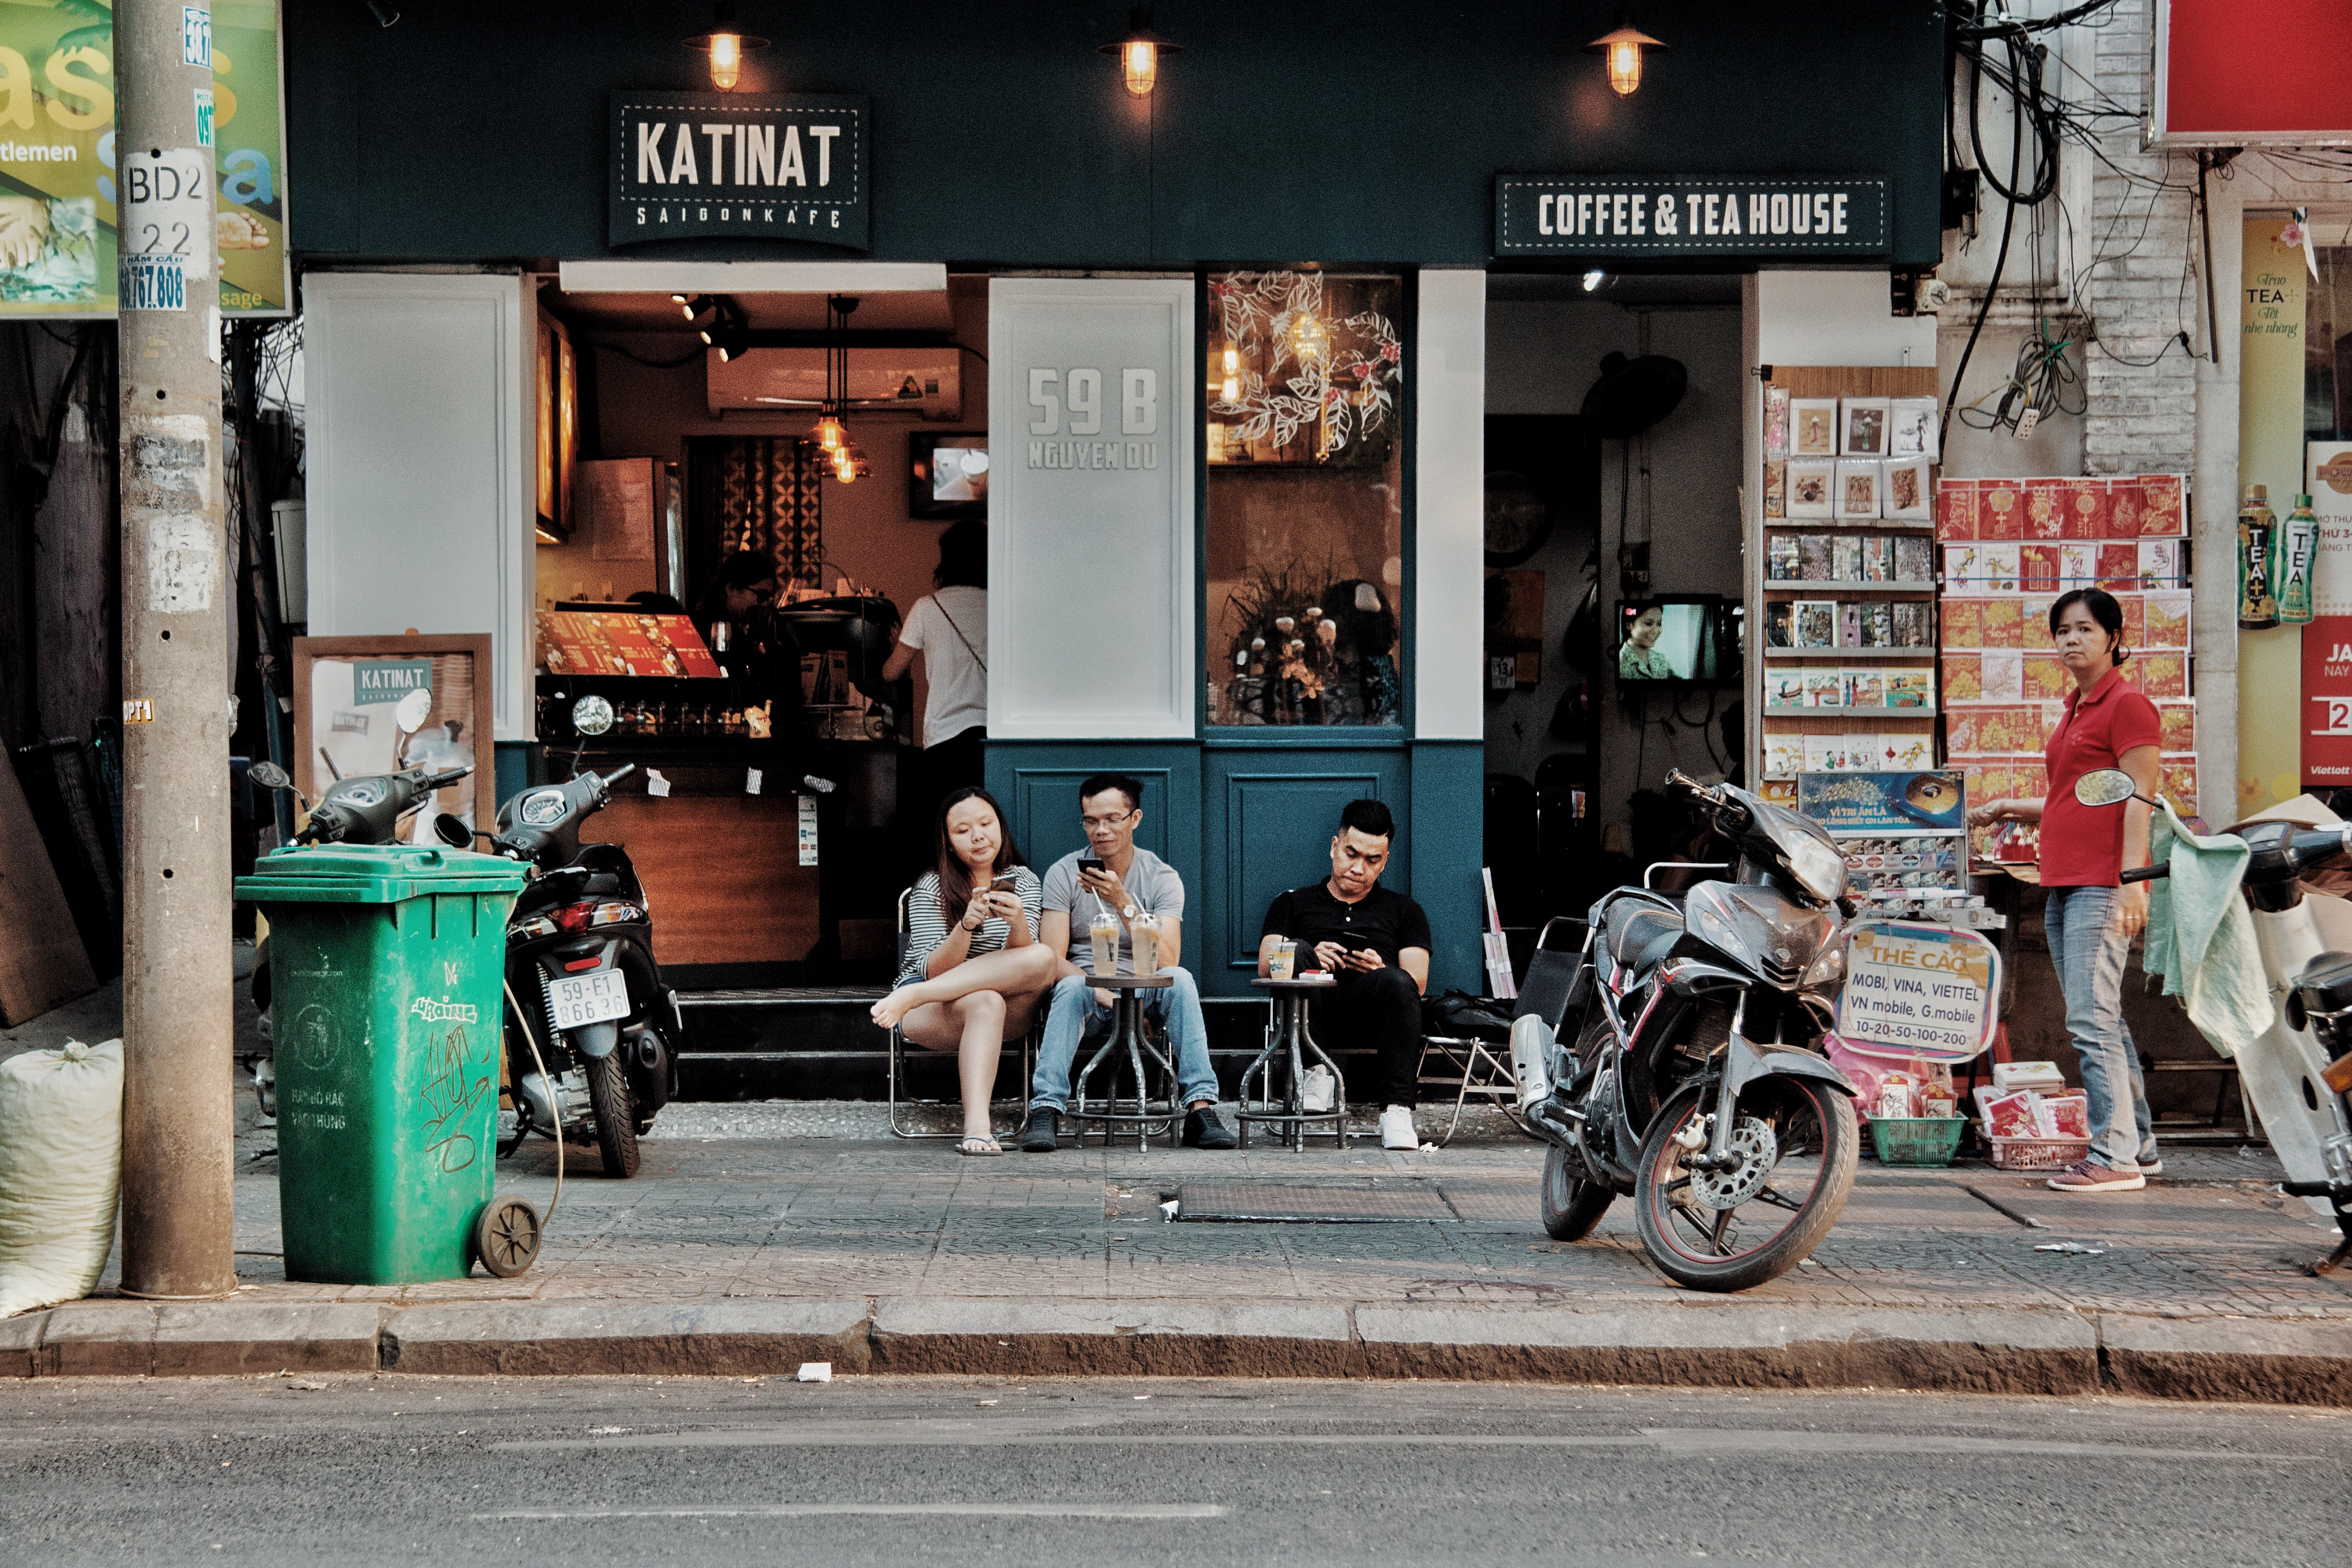 Three people sitting on chairs outside coffee & tea house near motorcycles photo